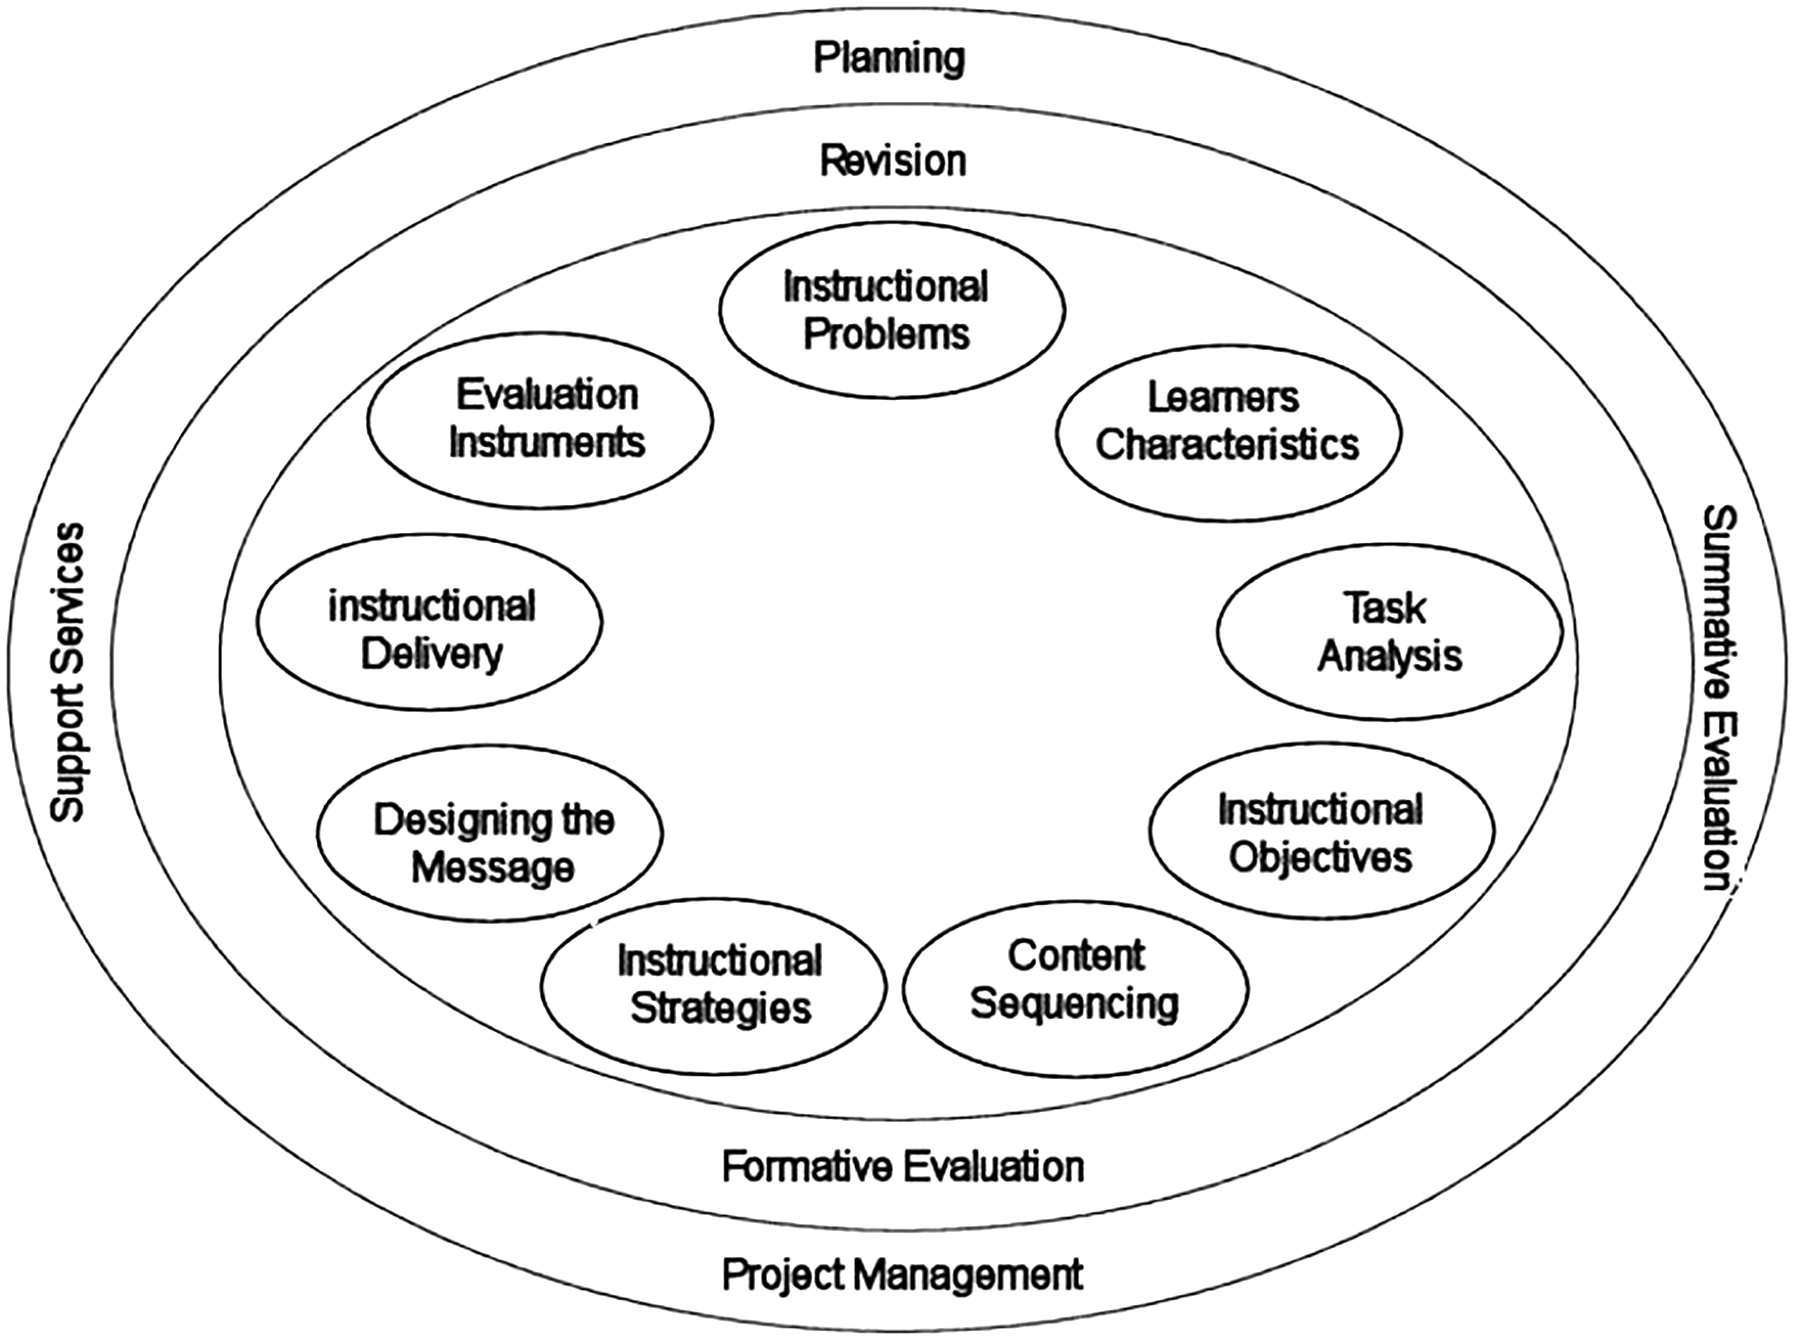 Diagram of the Morrison, Ross and Kemp model of instructional design